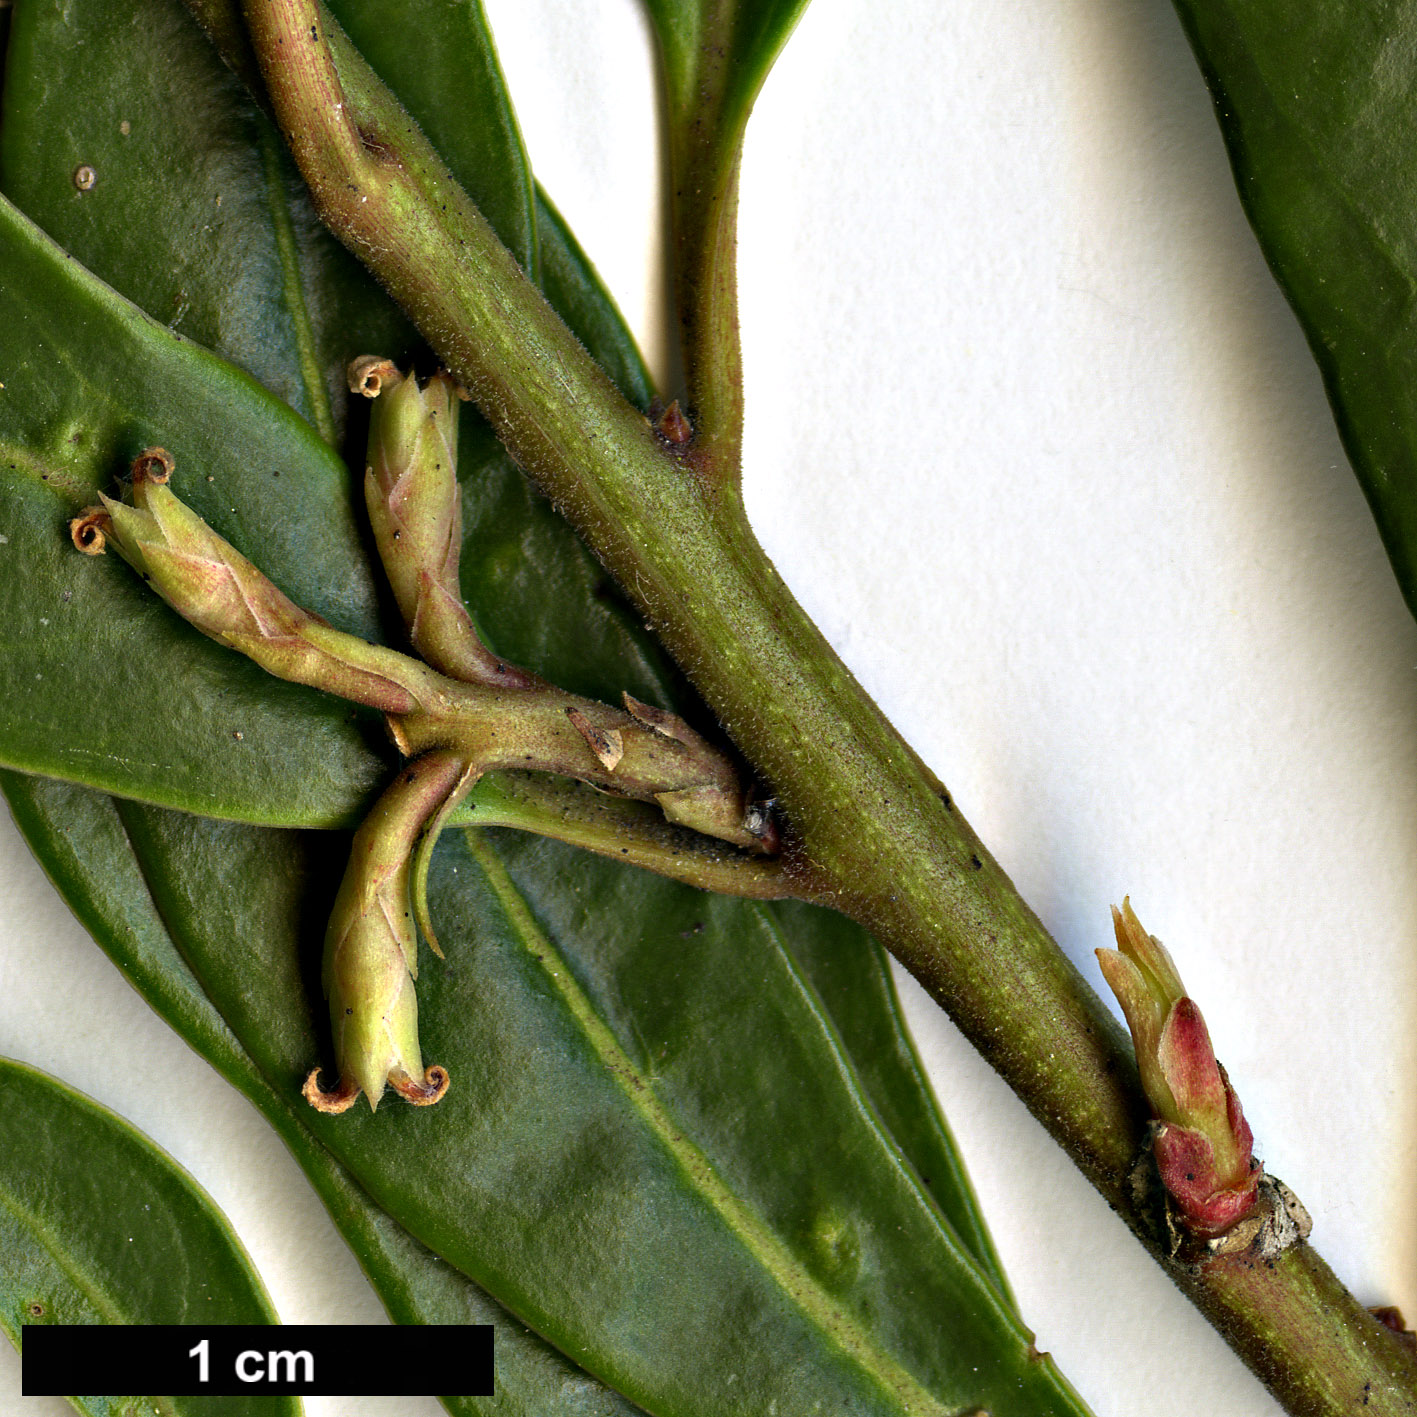 High resolution image: Family: Buxaceae - Genus: Sarcococca - Taxon: hookeriana - SpeciesSub: var. digyna